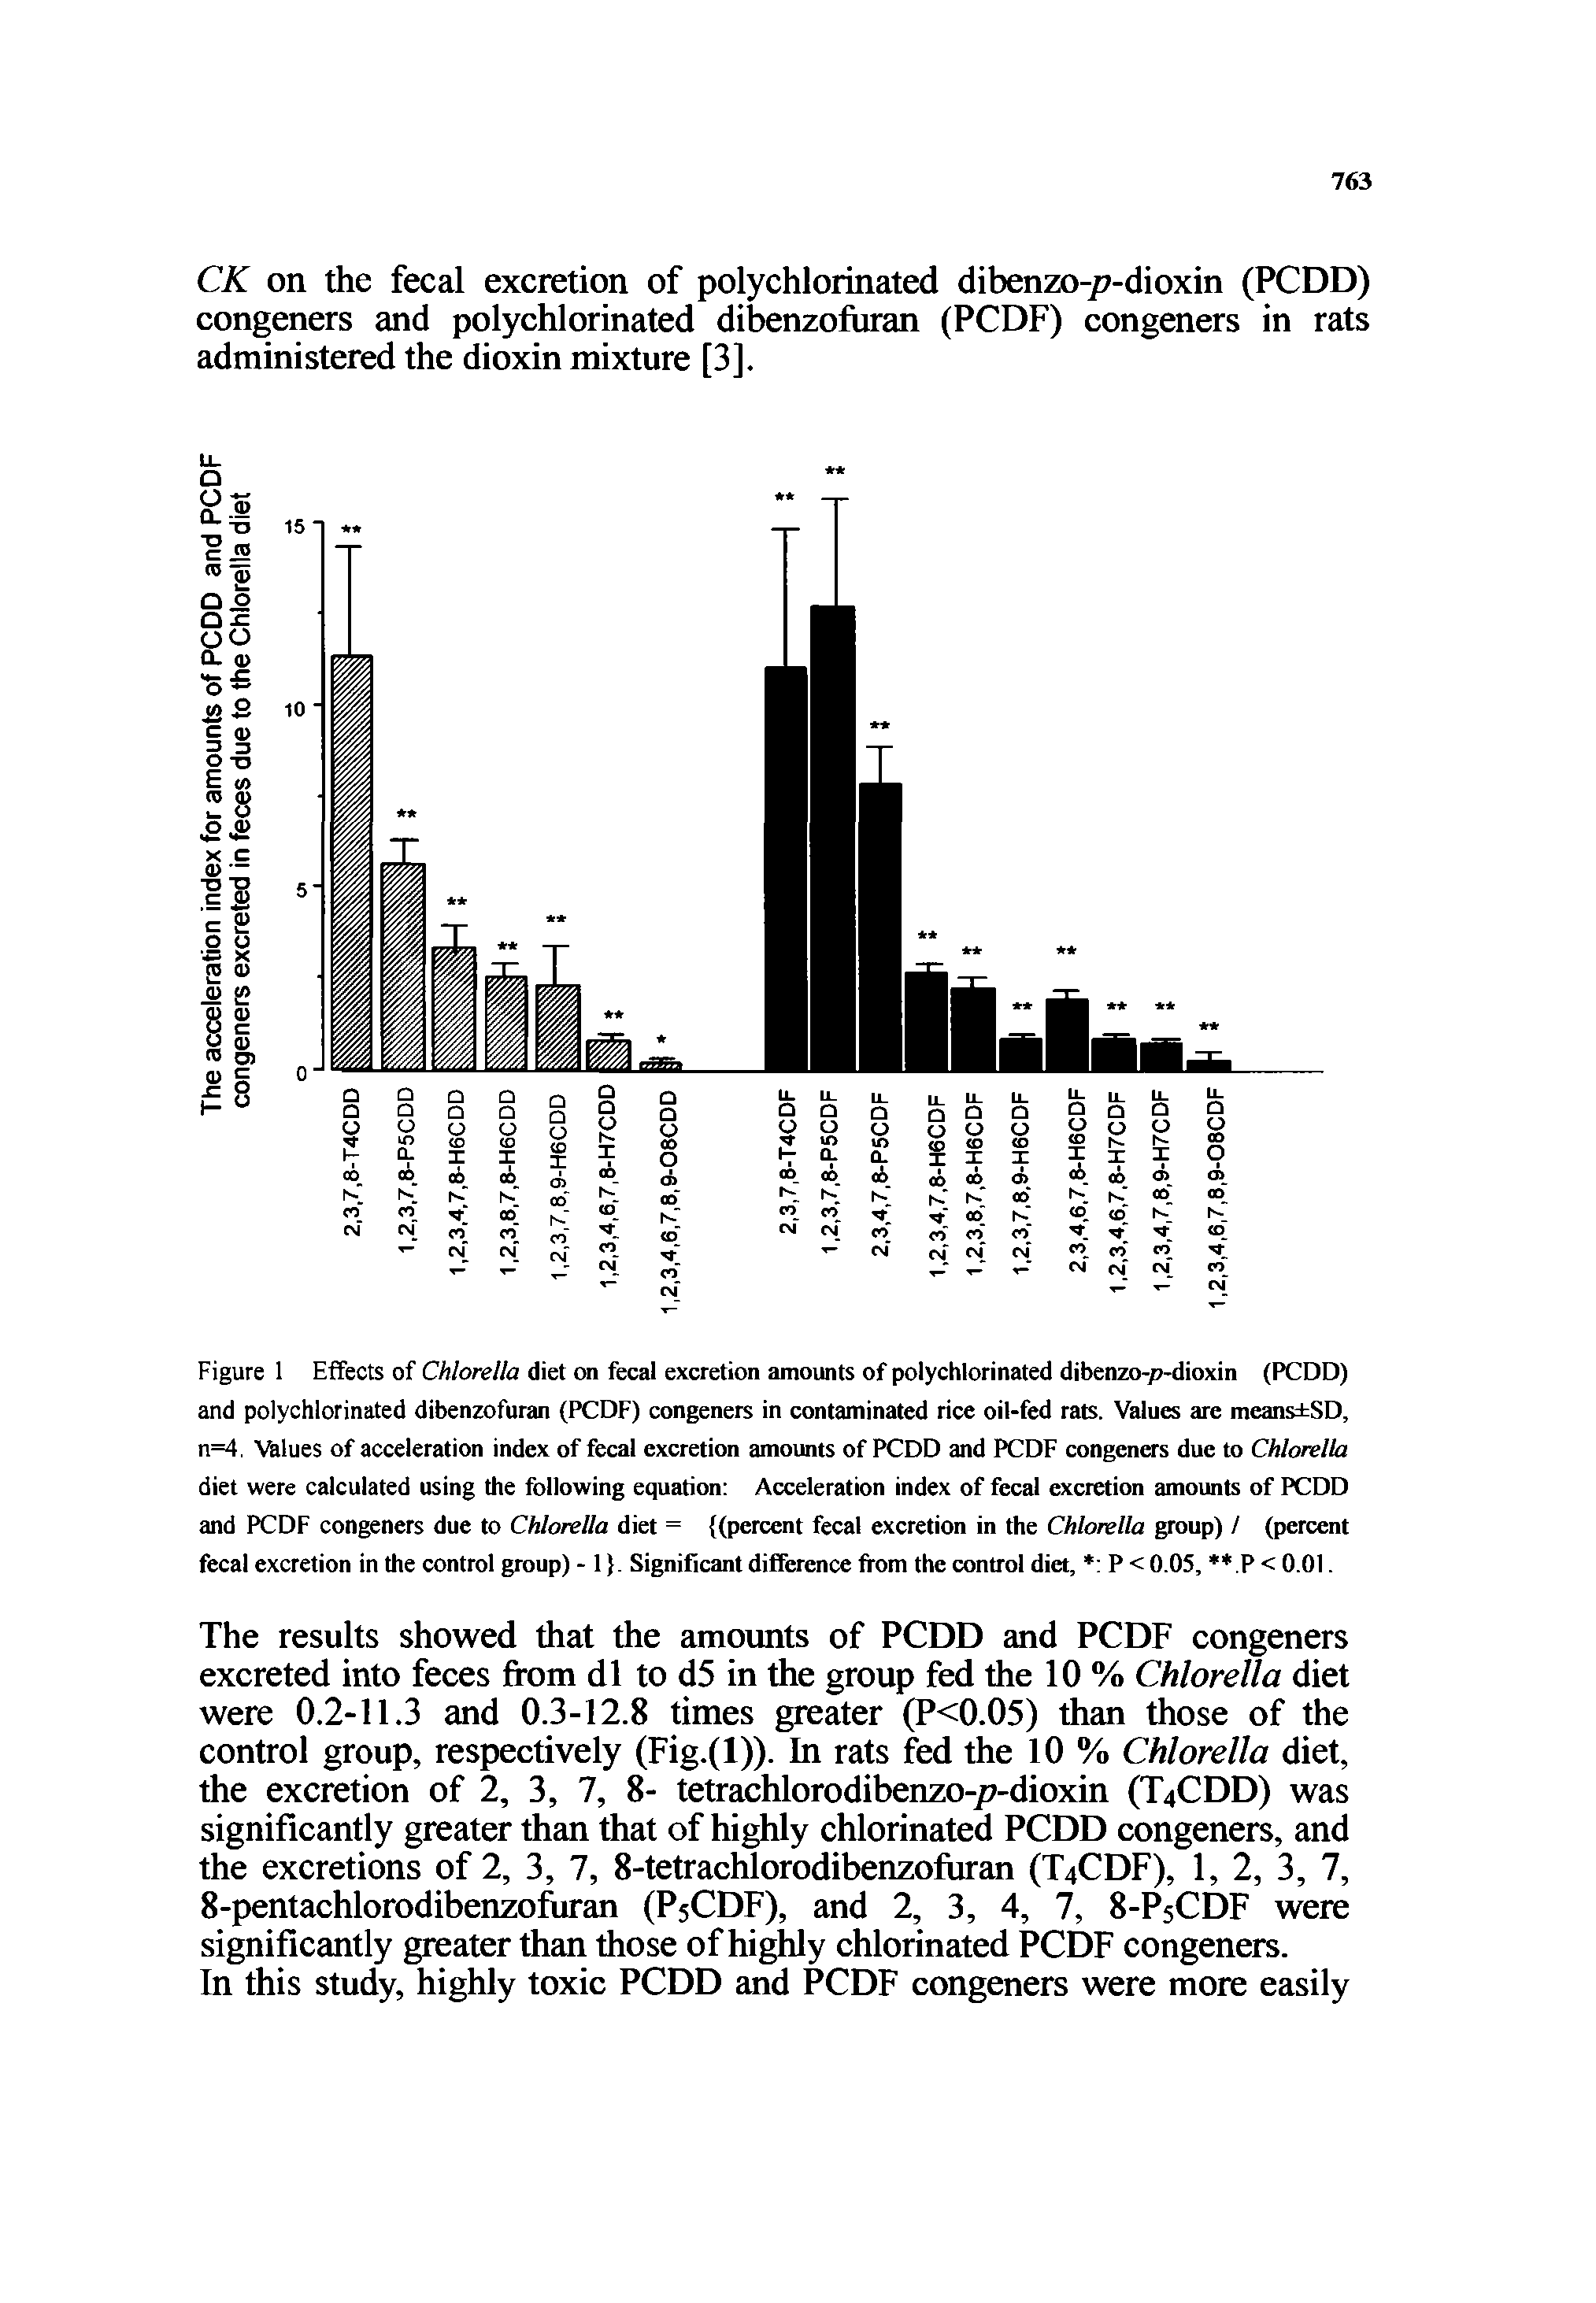 Figure 1 Effects of Chlorella diet on fecal excretion amounts of polychlorinated dibenzo-p-dioxin (PCDD) and polychlorinated dibenzofuran (PCDF) congeners in contaminated rice oil-fed rats. Values are means SD, n=4. Vhlues of acceleration index of fecal excretion amounts of PCDD and PCDF congeners due to Chlorella diet were calculated using the following equation Acceleration index of fecal excretion amounts of PCDD...